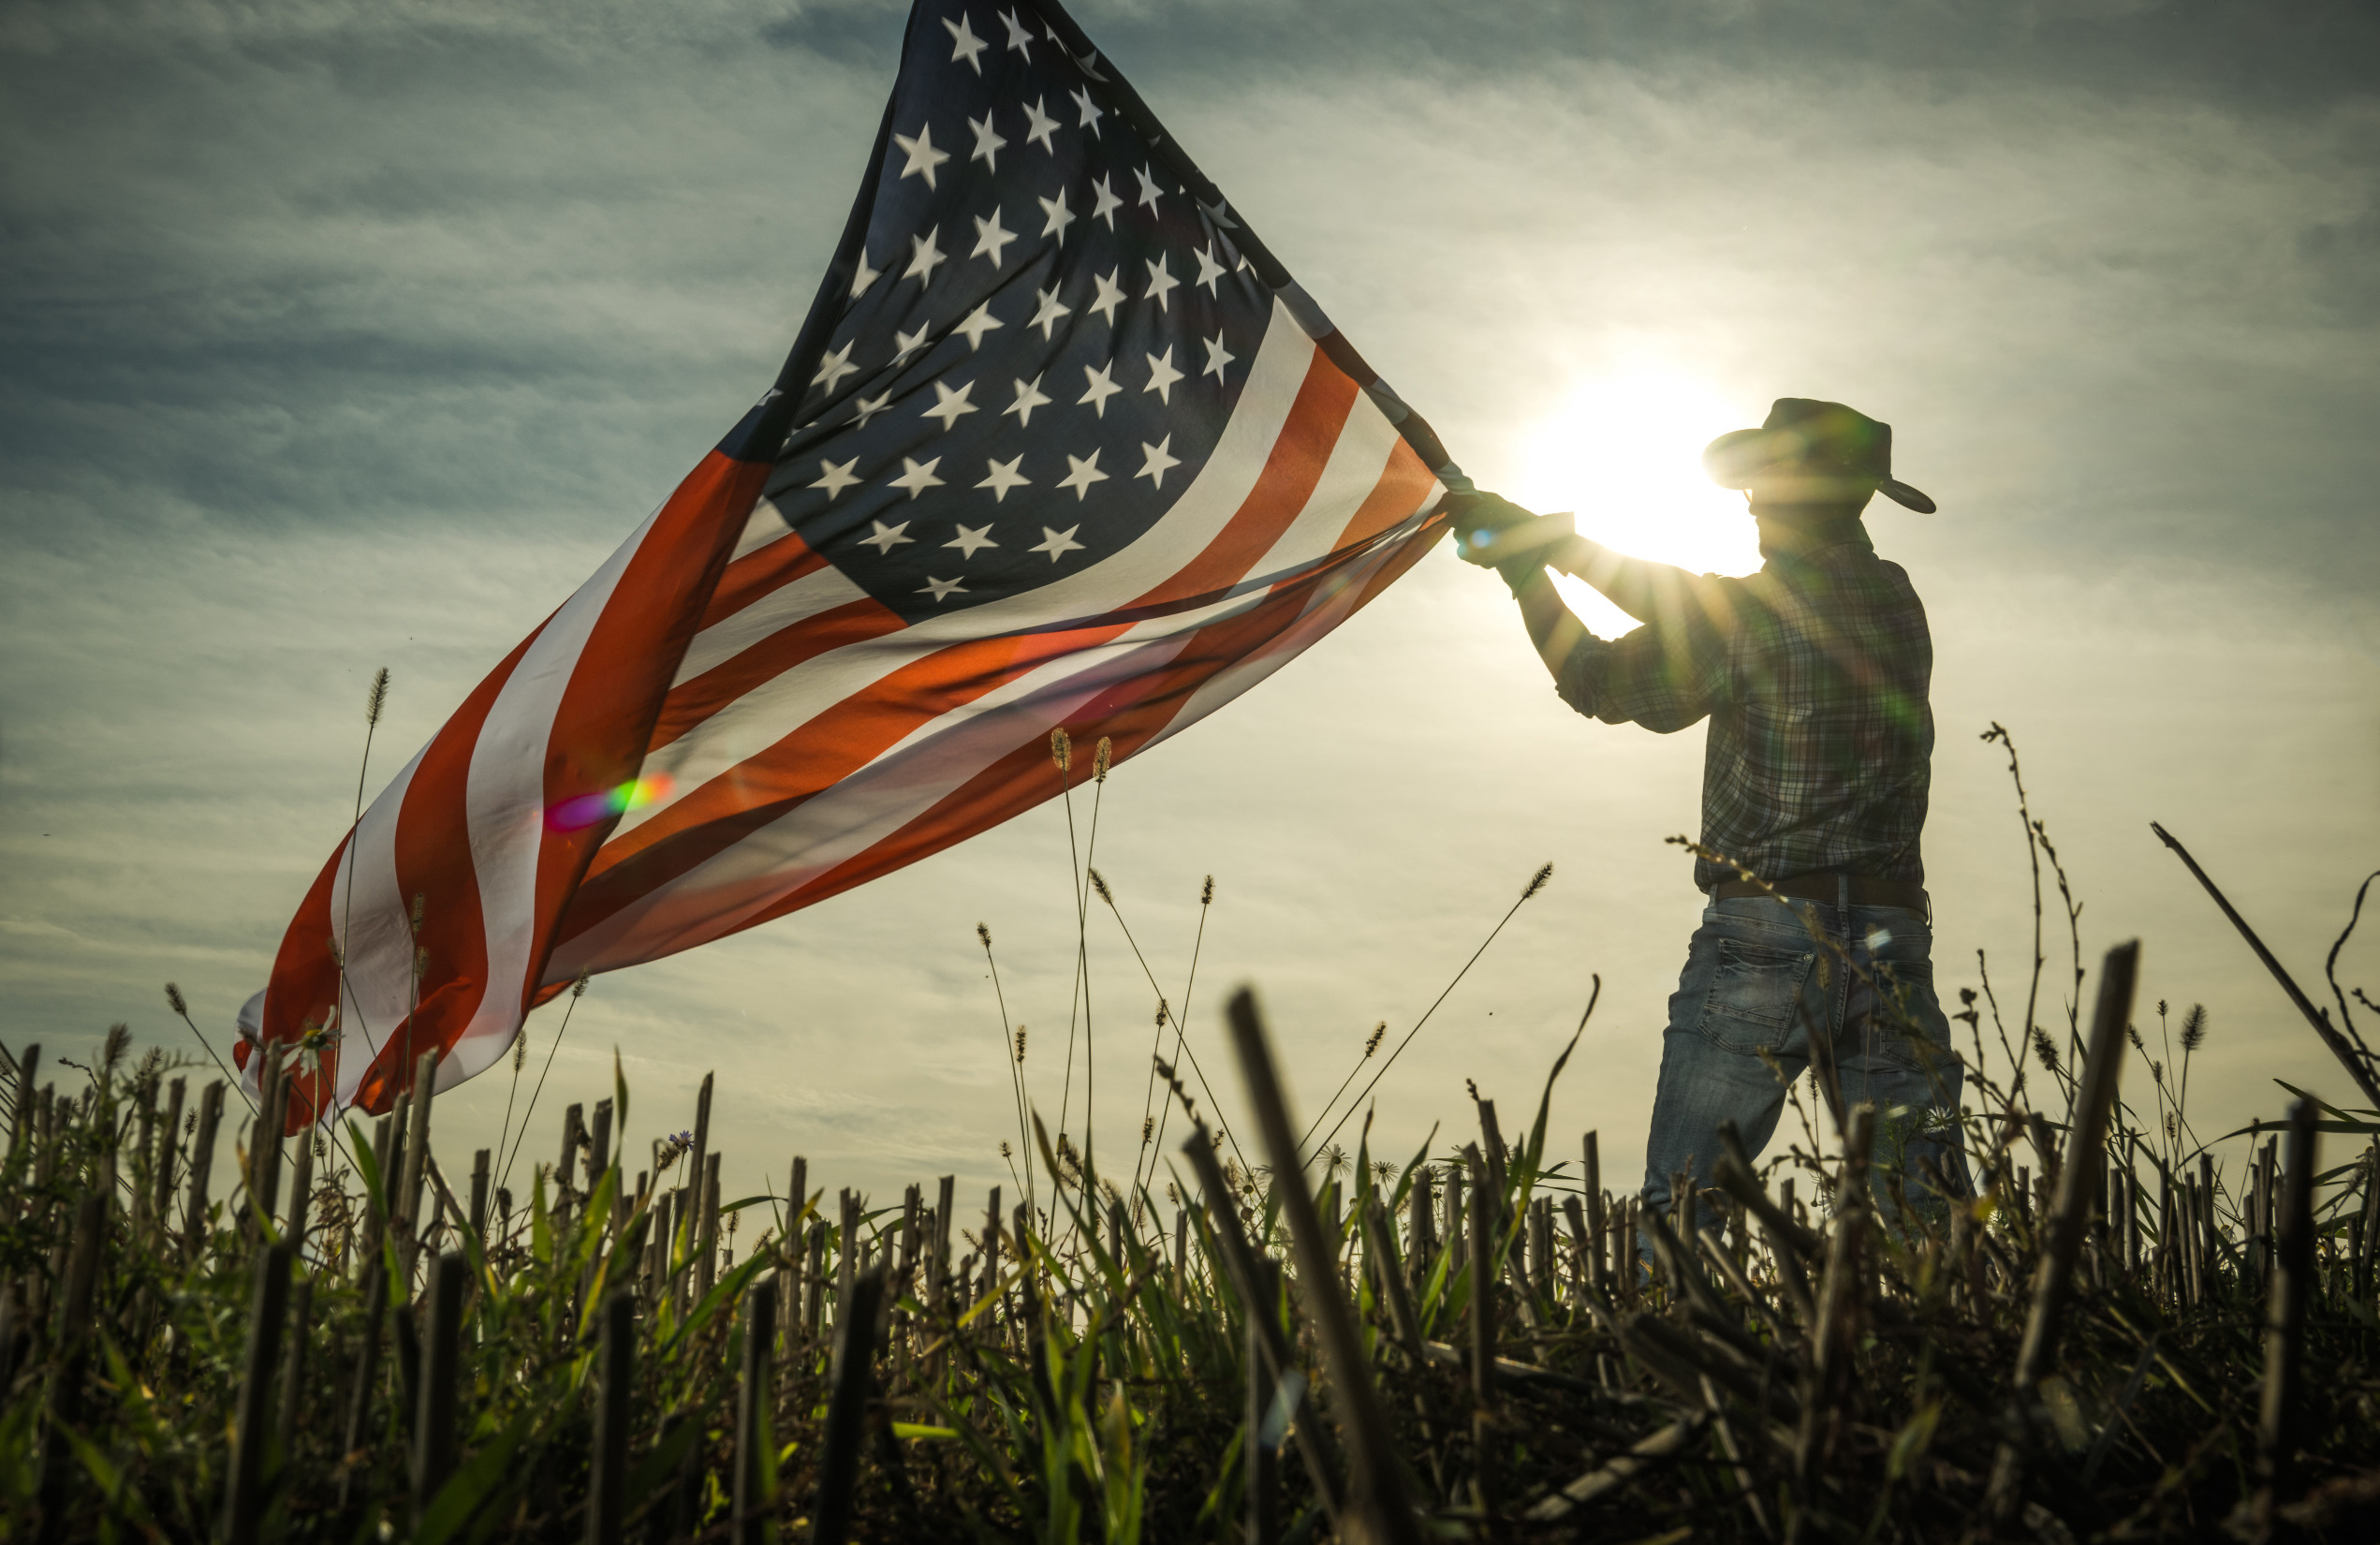 Empowering American farmers to stand up, take action 4